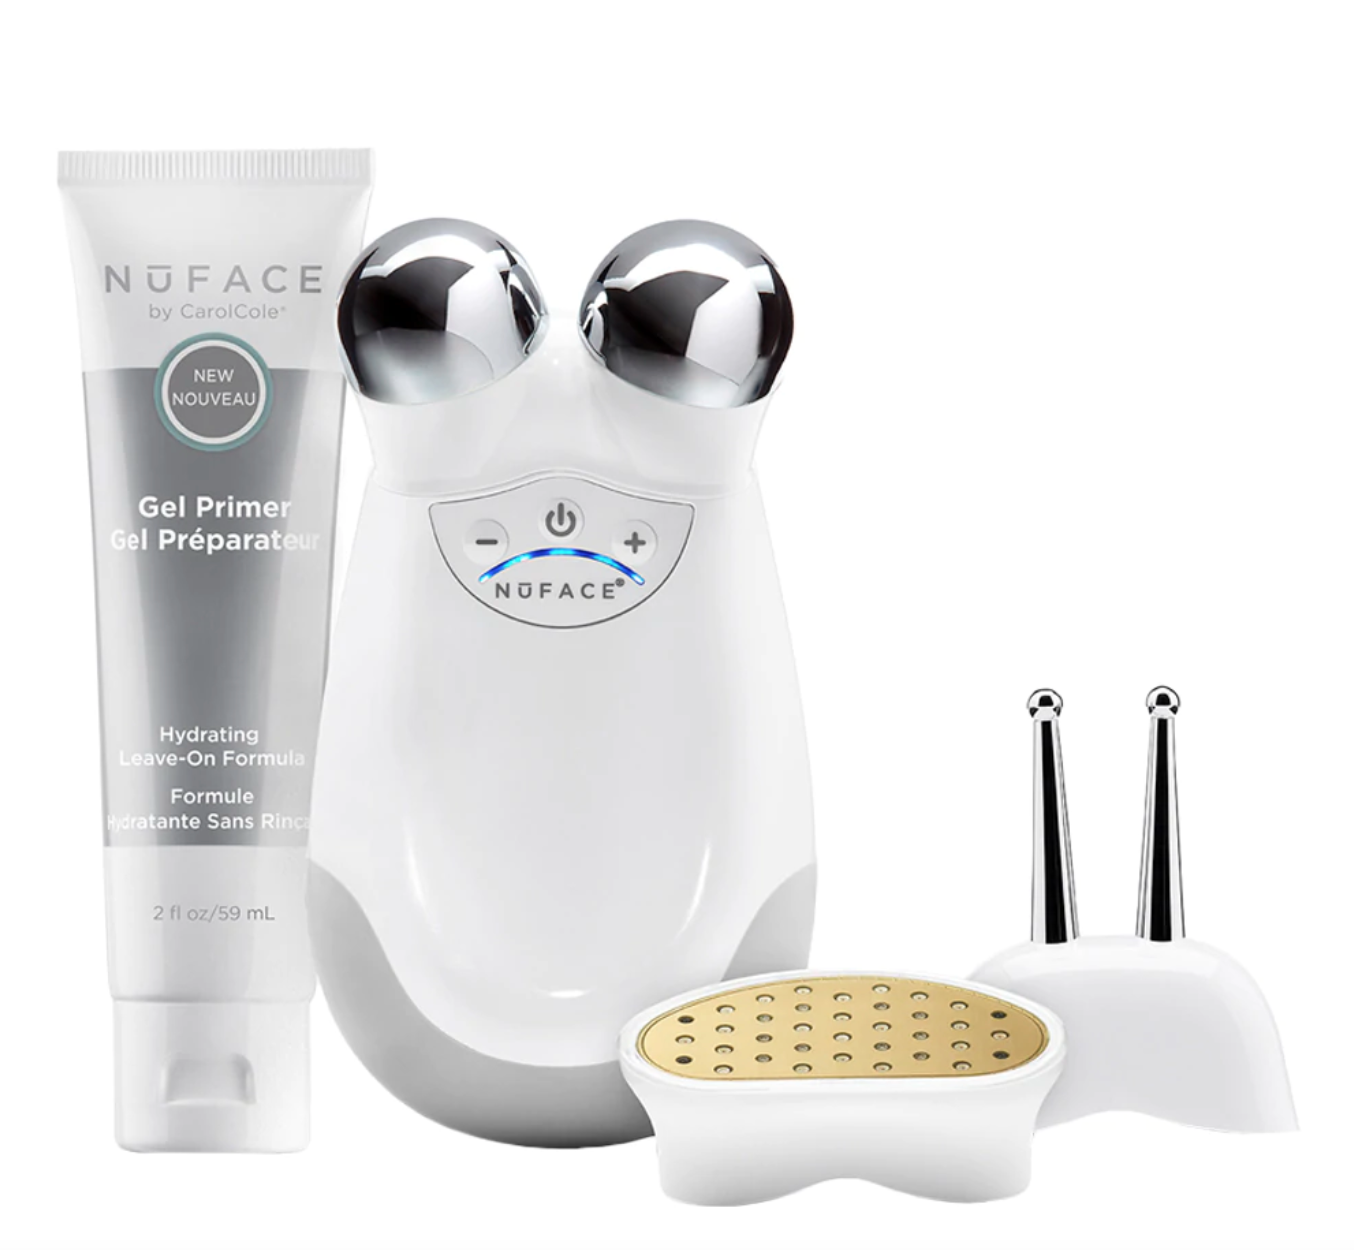 NuFACE Trinity Complete Facial Toning Kit